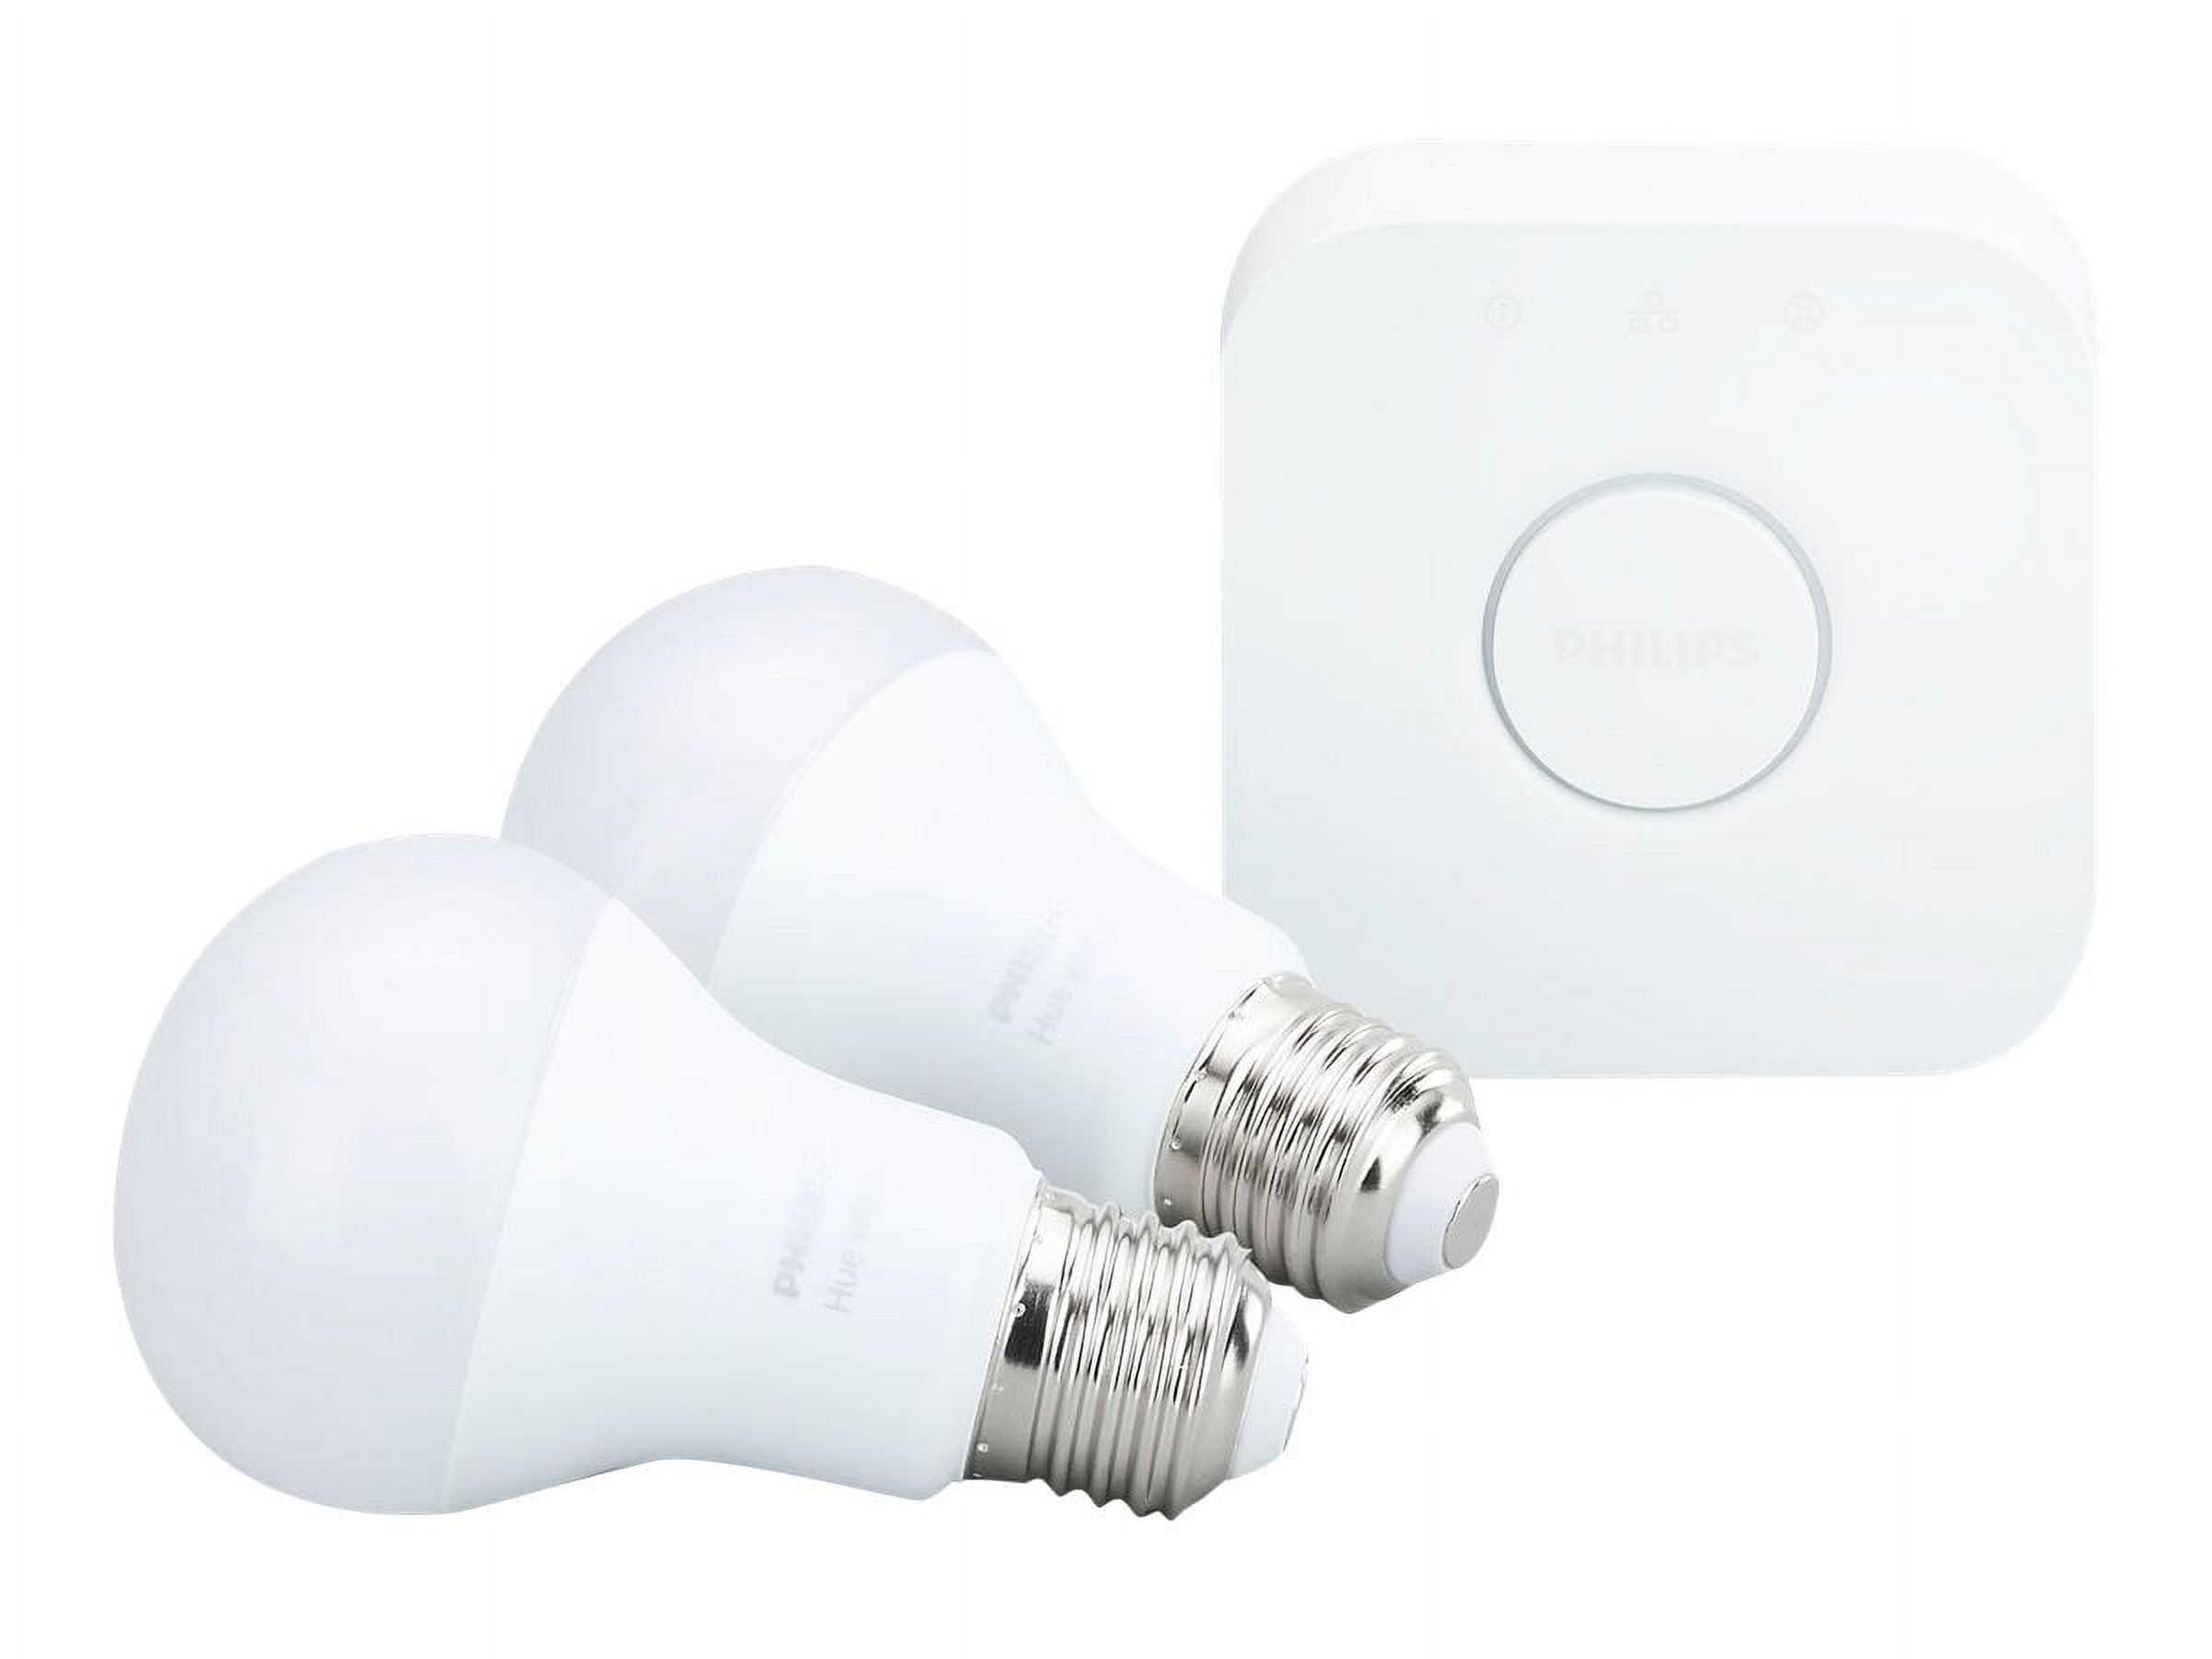 Philips Hue LED 60-Watt White Ambiance A19 Dimmable Wi-Fi Connected Smart Bulb 2 pack Starter Kit With Hub, E26 Medium Base - image 1 of 8